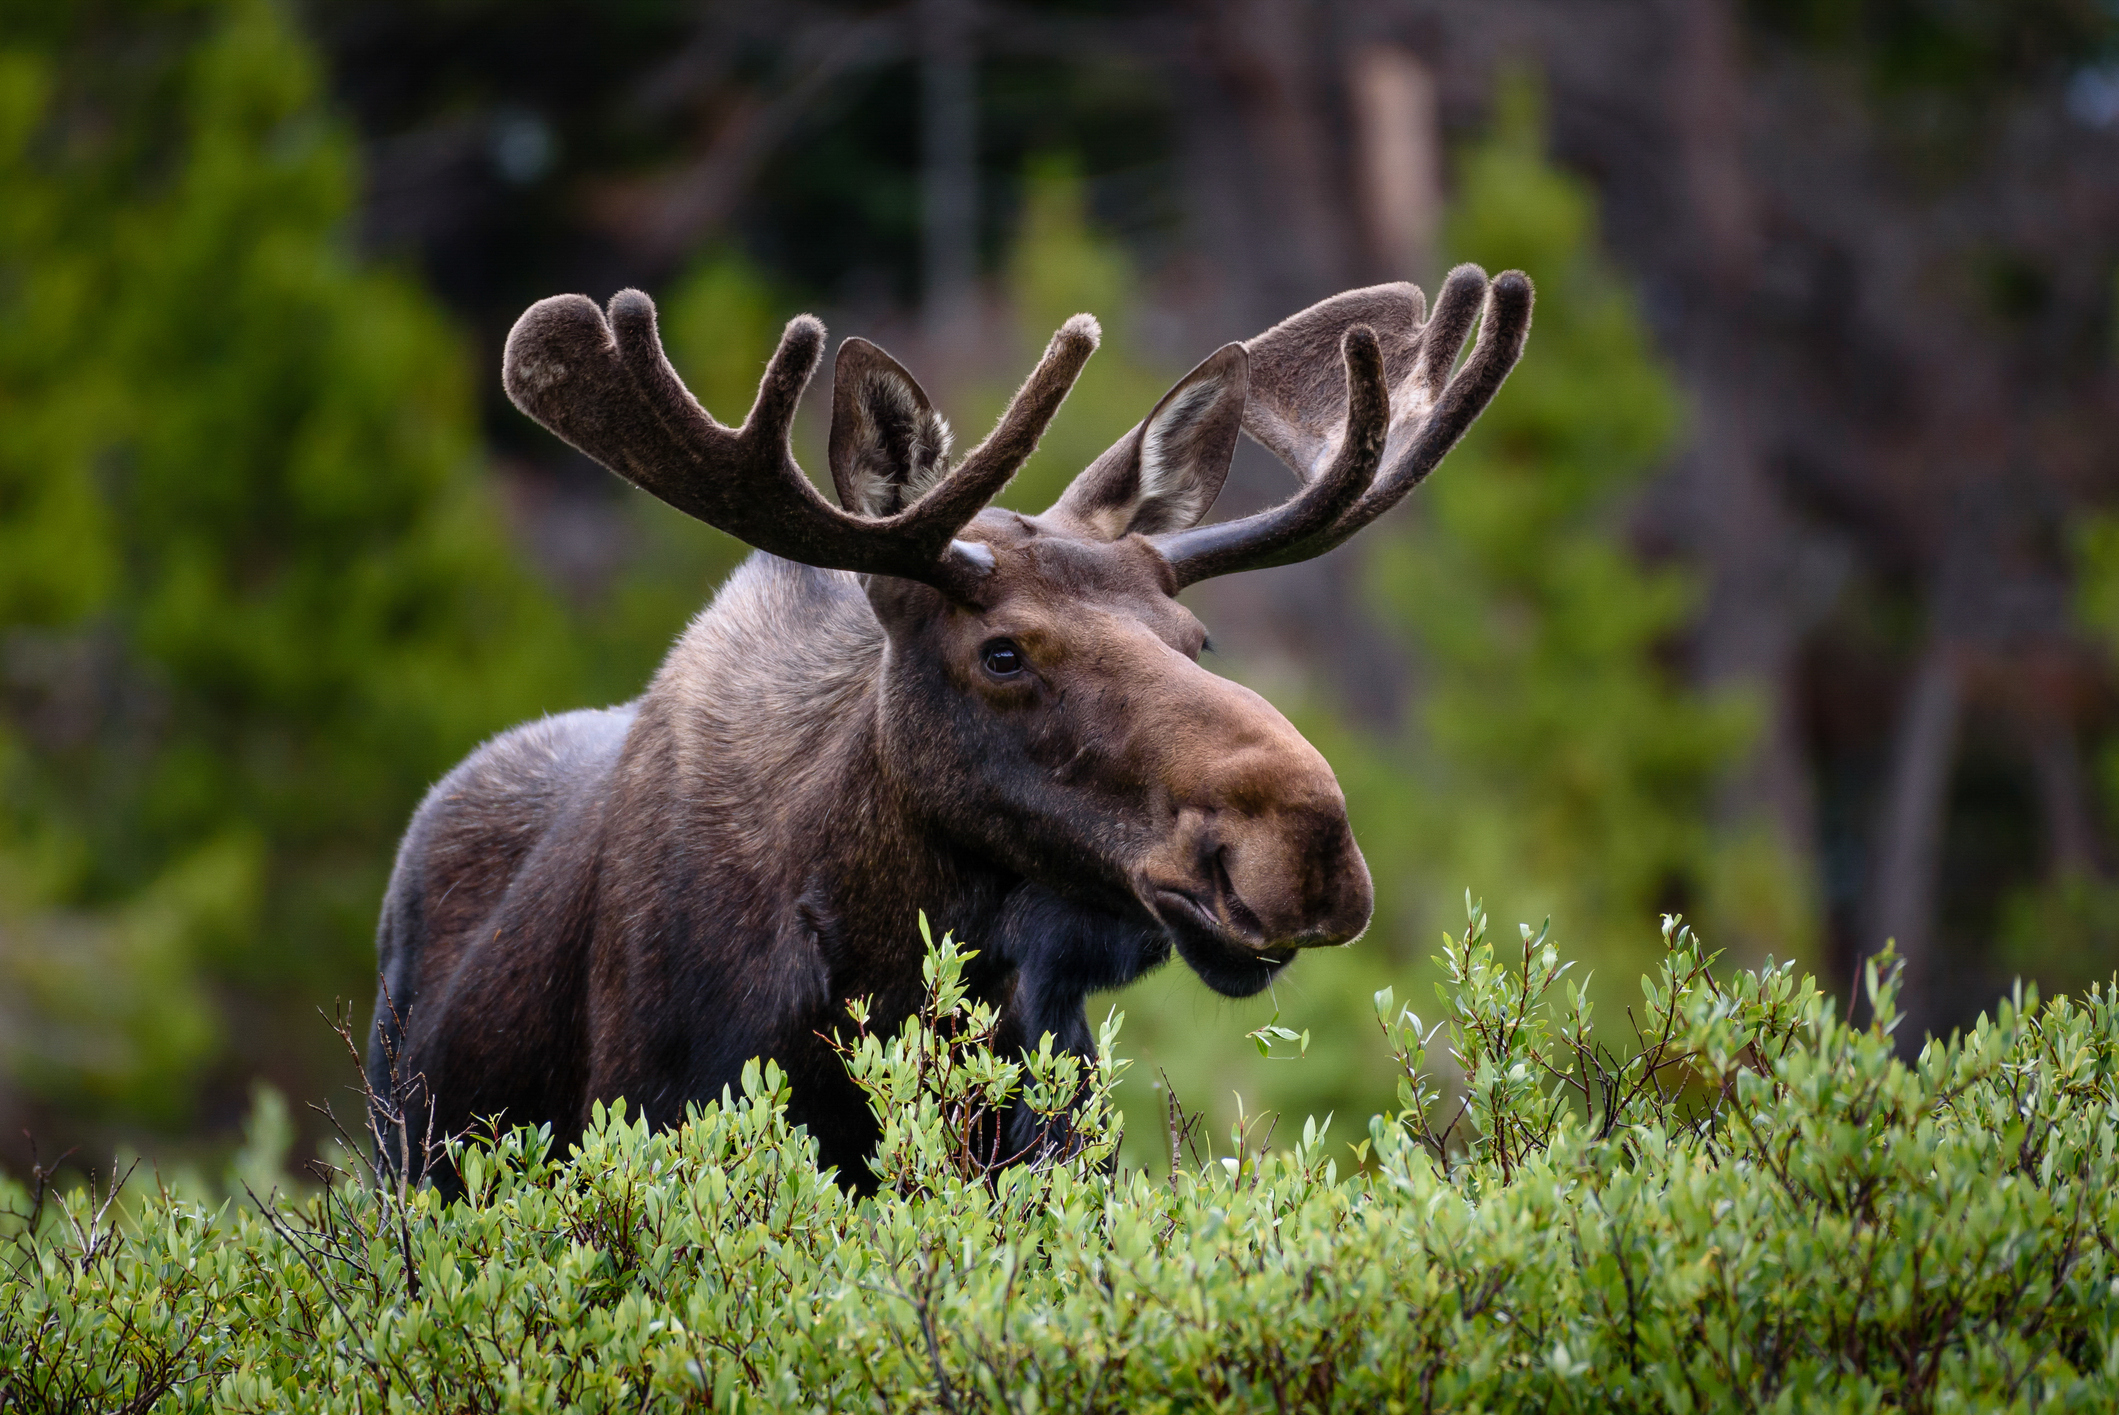 A moose standing in a field with shrubs